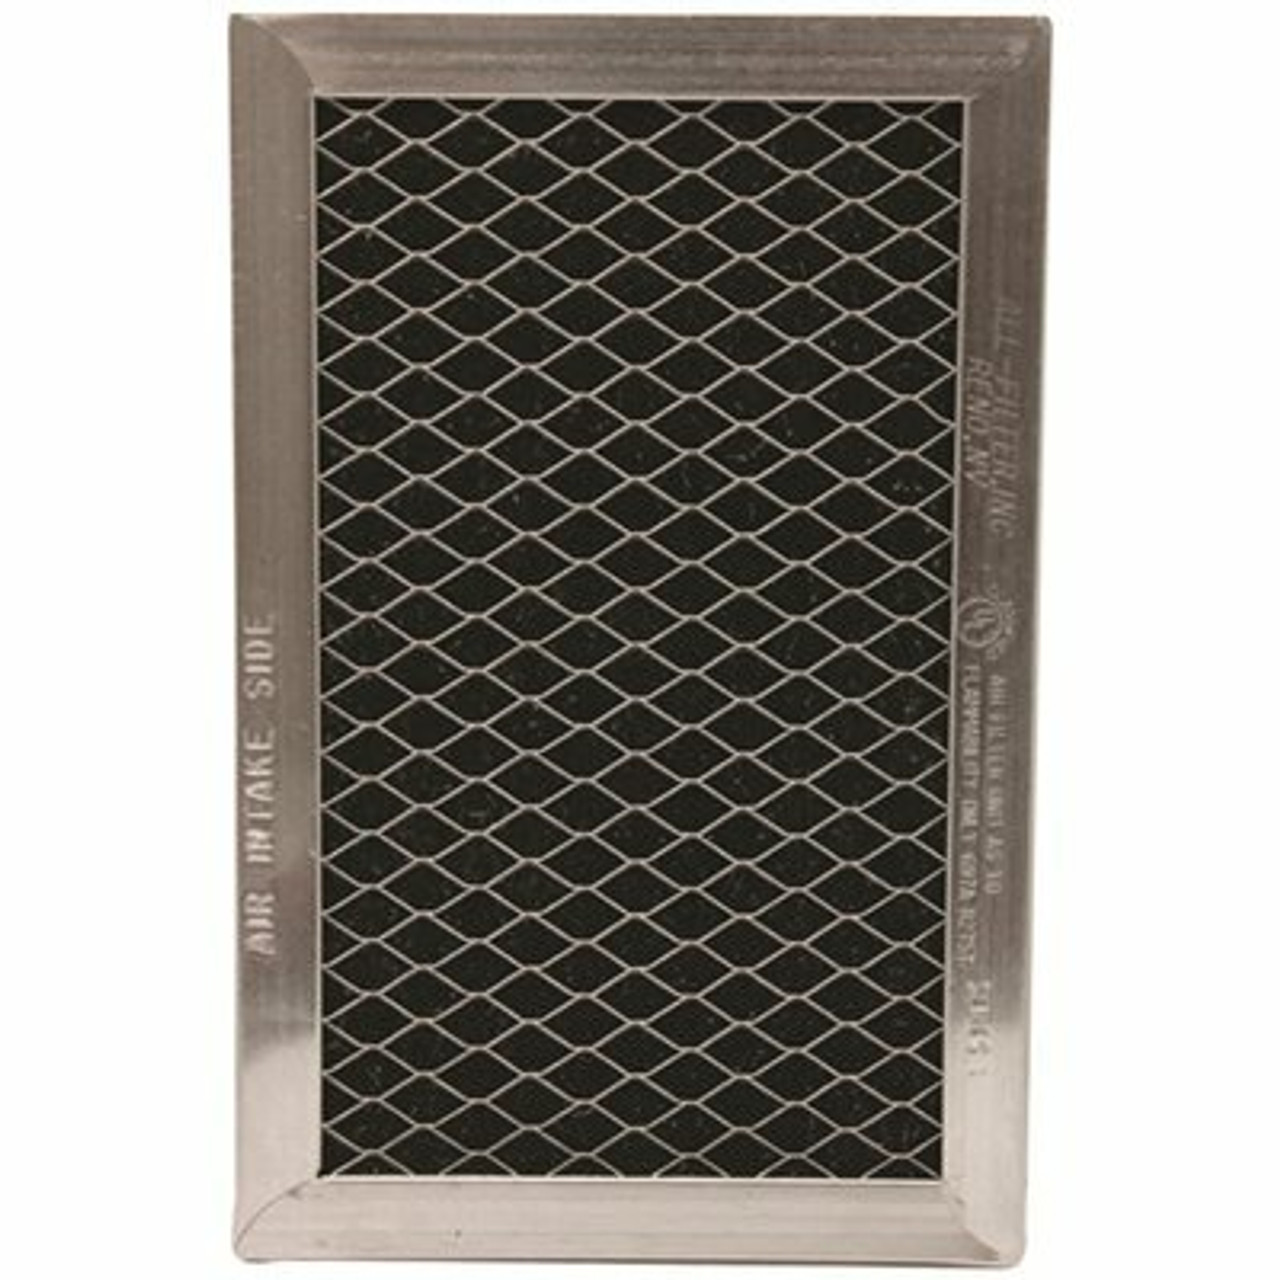 All-Filters 3-7/8 In. X 6-1/8 In. X 3/8 In. Carbon Filter, Replacement Filter For Wb06X10823, Wb02X11124 (10-Pack)